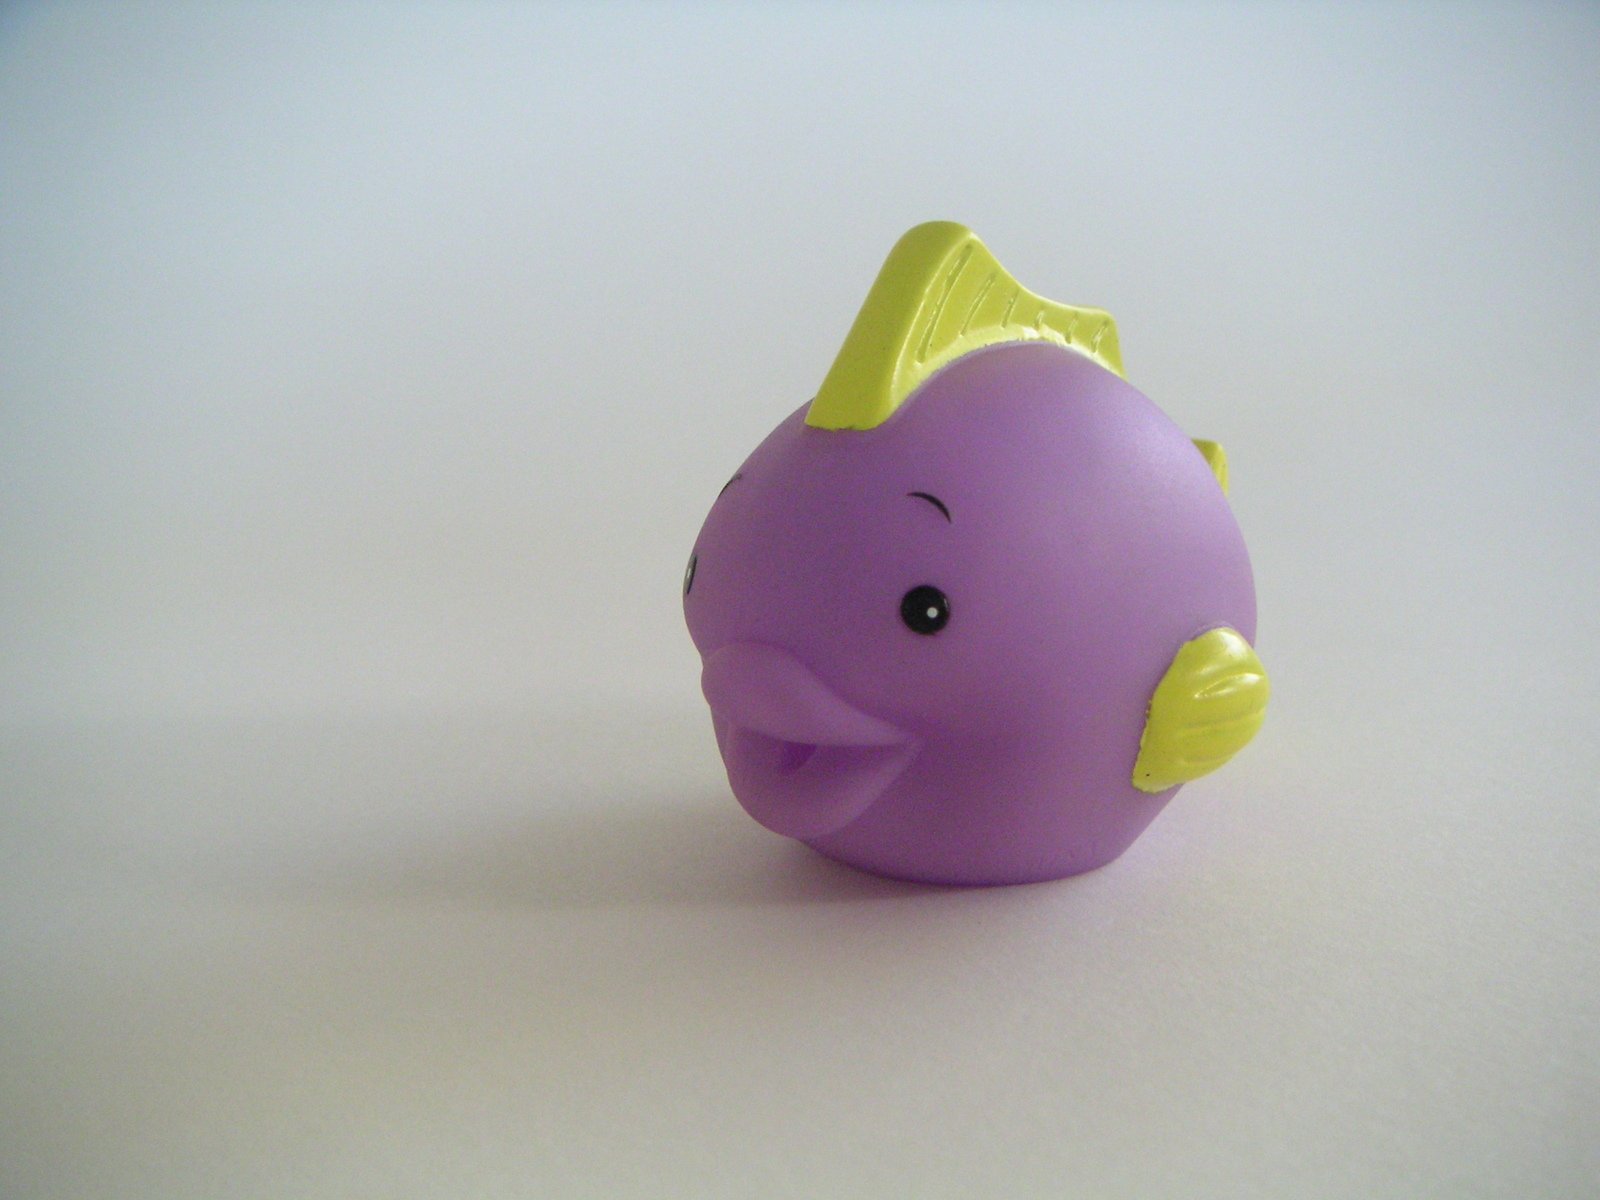 this is an image of a purple and yellow fish figure